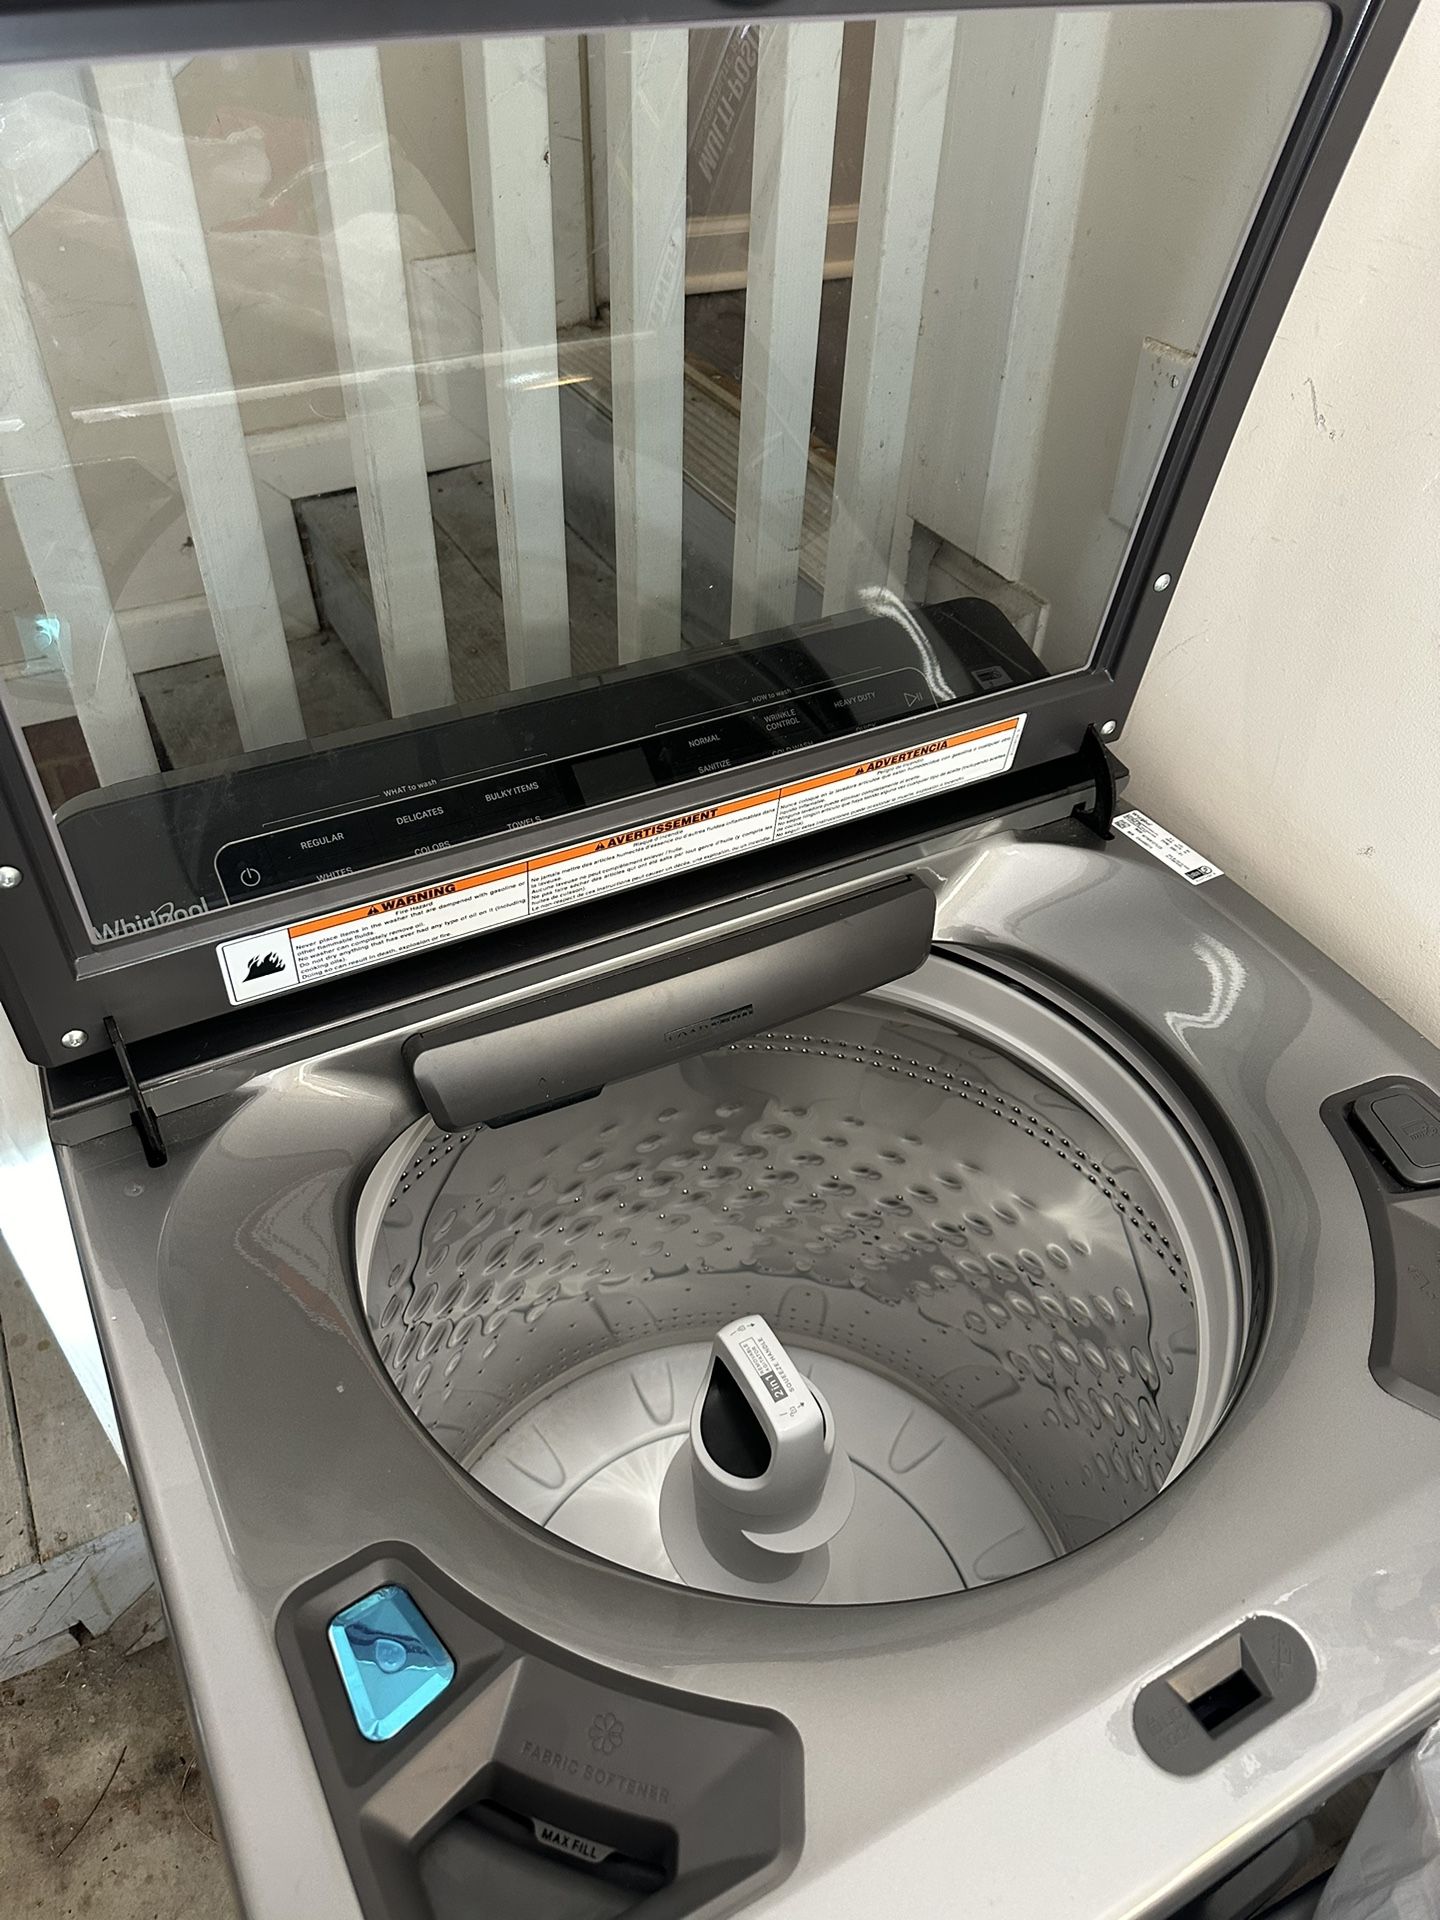 Whirlpool - Top Load Washer with 2 in 1 Removable Agitator - Chrome shadow Model: WTW8127LC SKU: (contact info removed) Quantity: 1